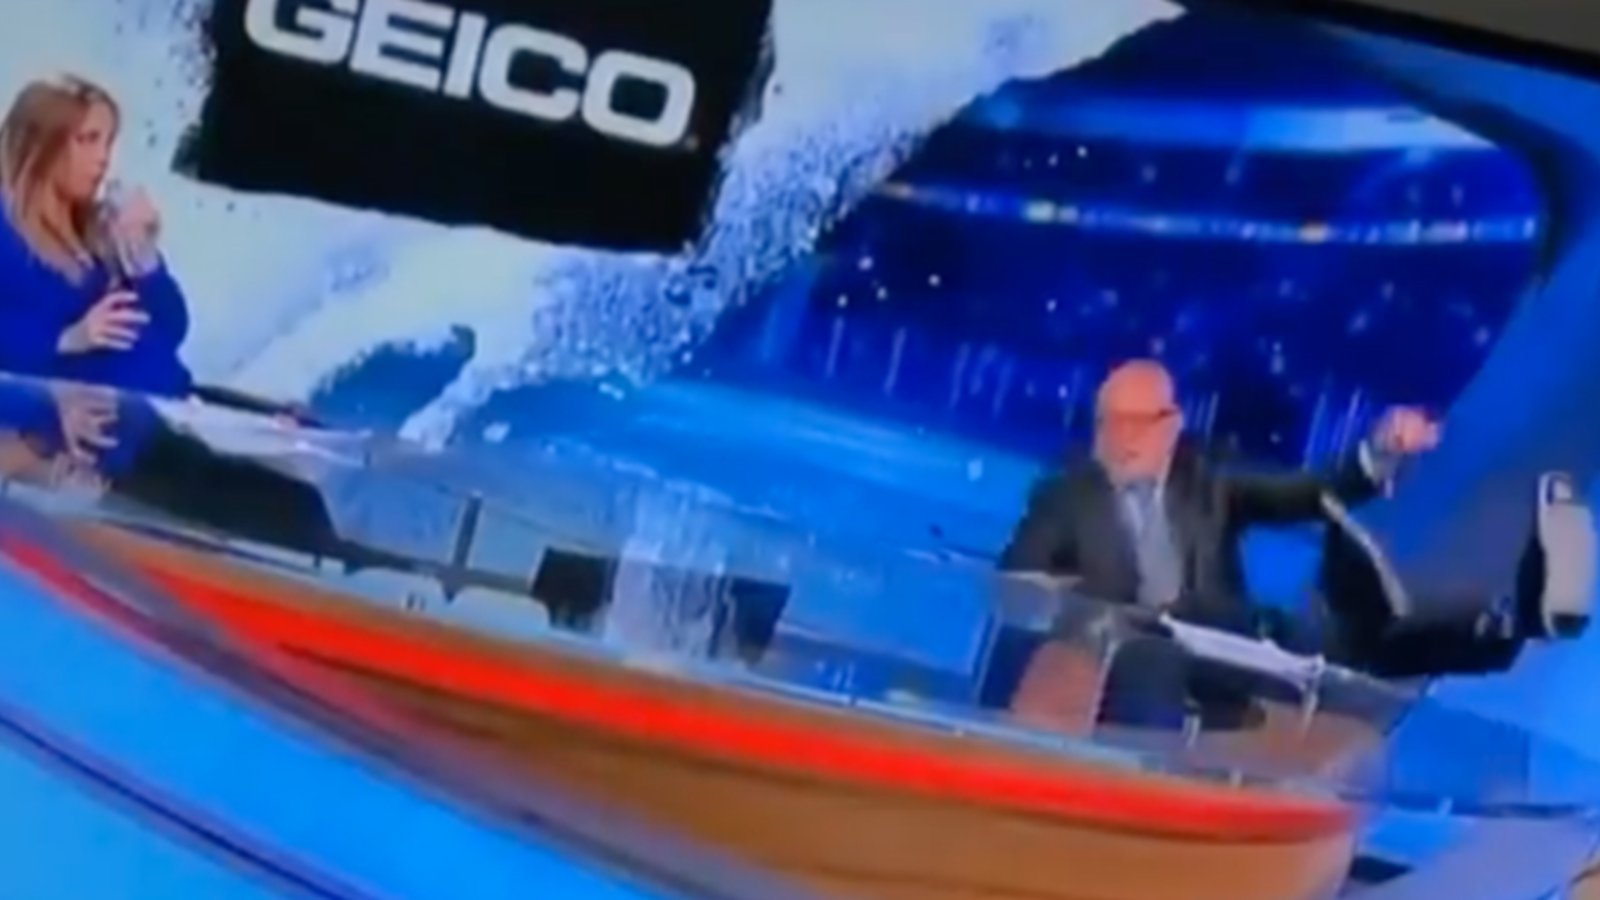 NHL analyst and Devils legend Ken Daneyko falls out of his chair on live TV